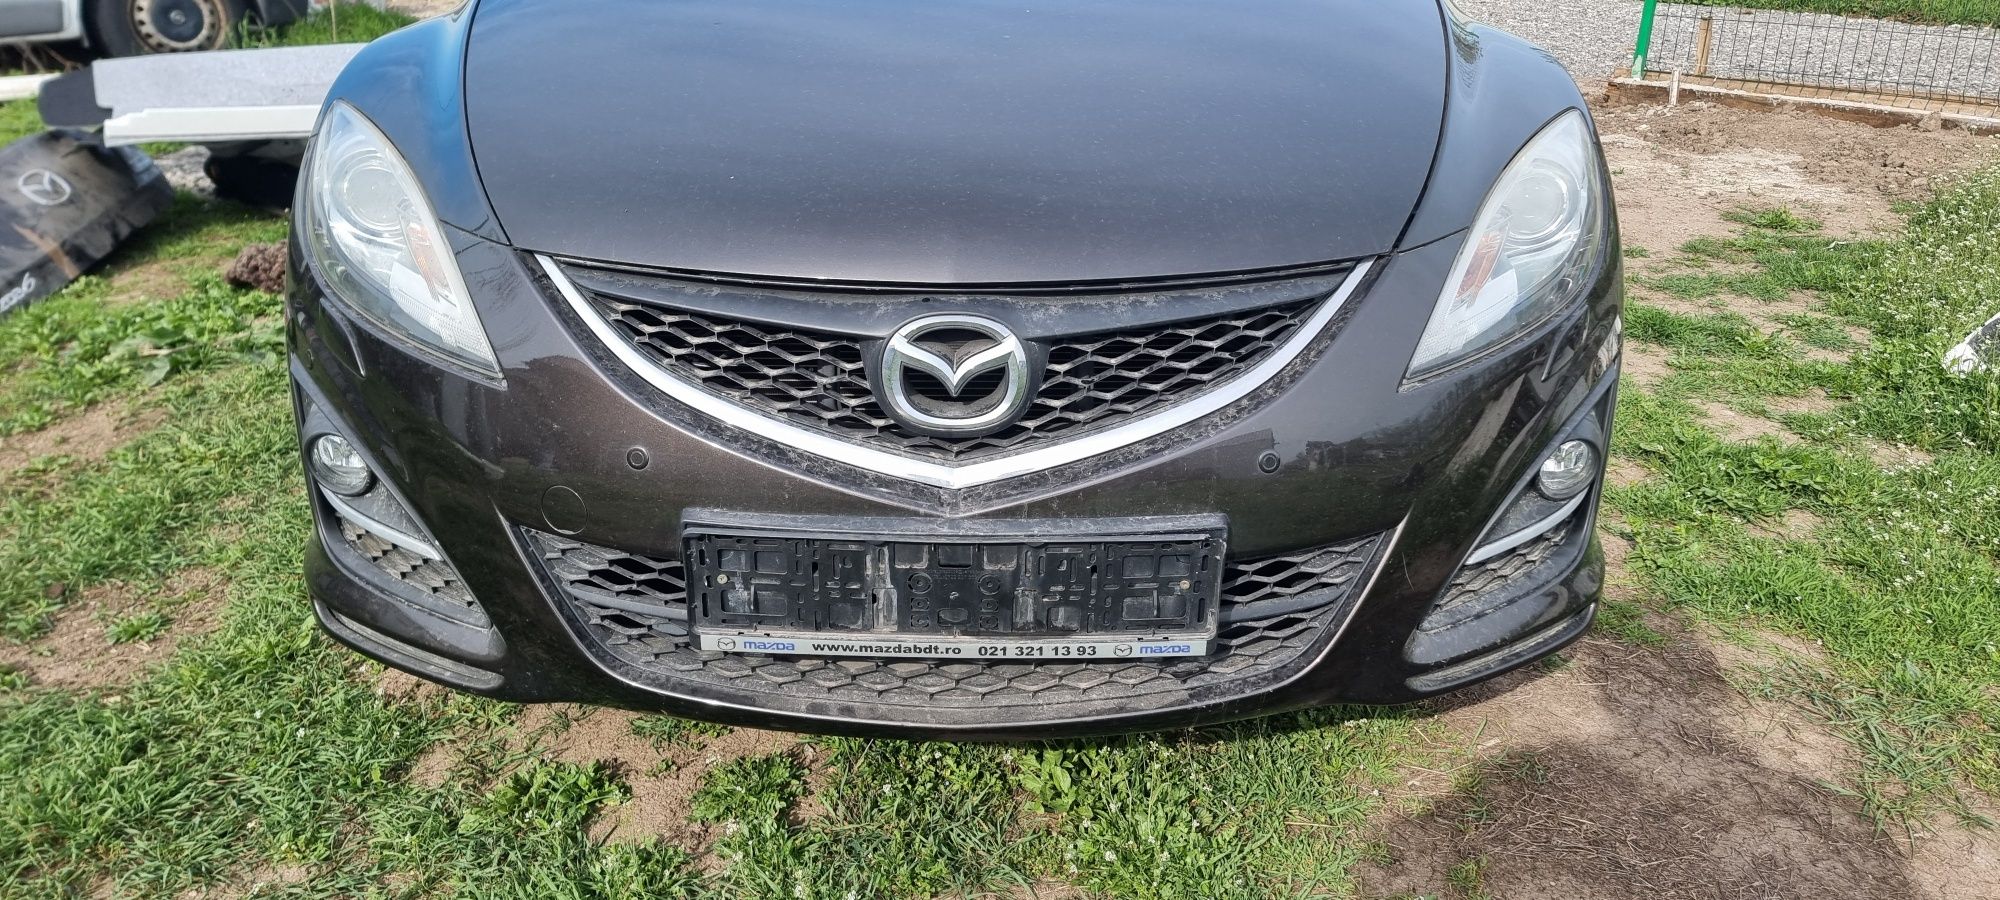 Piese Mazda 6 GH facelift